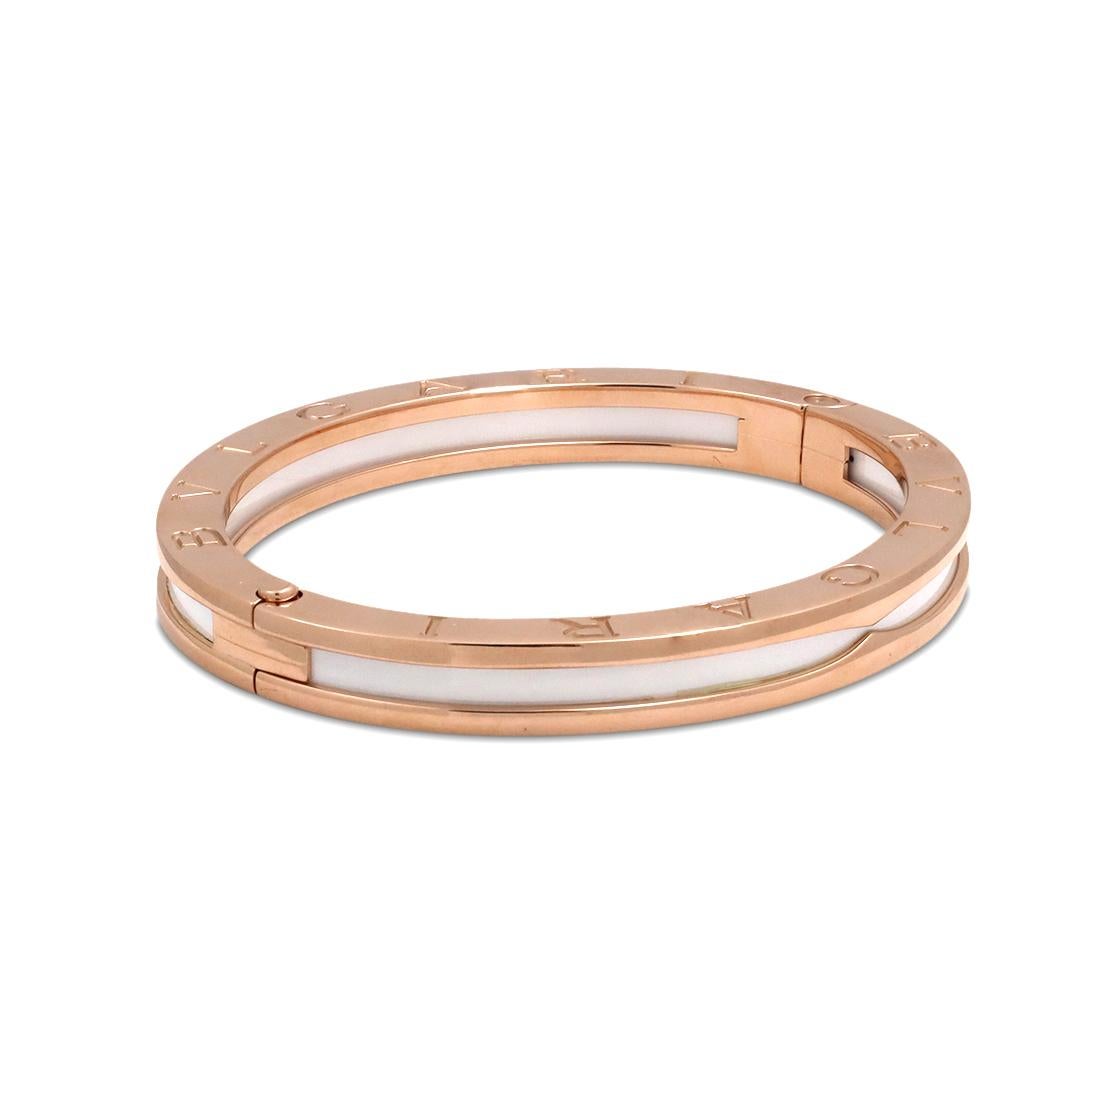 Authentic Bvlgari 'B.Zero1' bracelet crafted in 18 karat rose gold engraved with the Bvlgari logo on both sides. The bracelet has a high polished lip of gold on either side and a center strip of white ceramic. Signed Bvlgari, Au750, M, Made in Italy